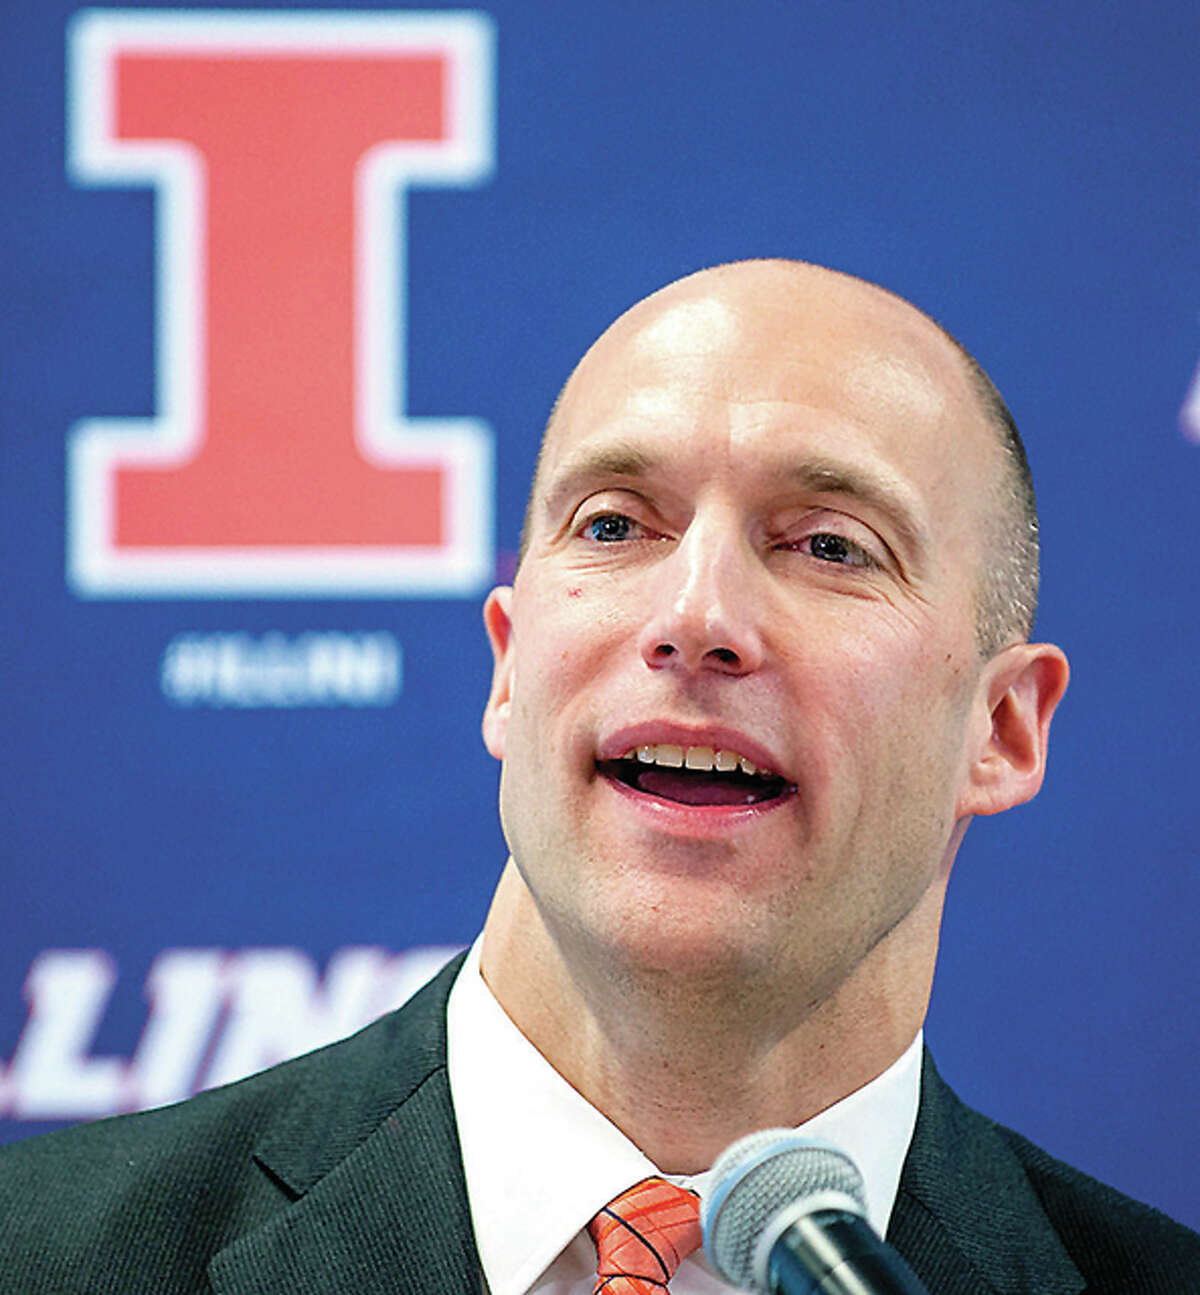 Josh Whitman, speaks after being announced as the new Illinois athletic director Thursday in Champaign. On Friday, Whitman met with Illini boosters and donors, as well as with the media at the Mannie Jackson Center for the Humanties in Edwardsville.